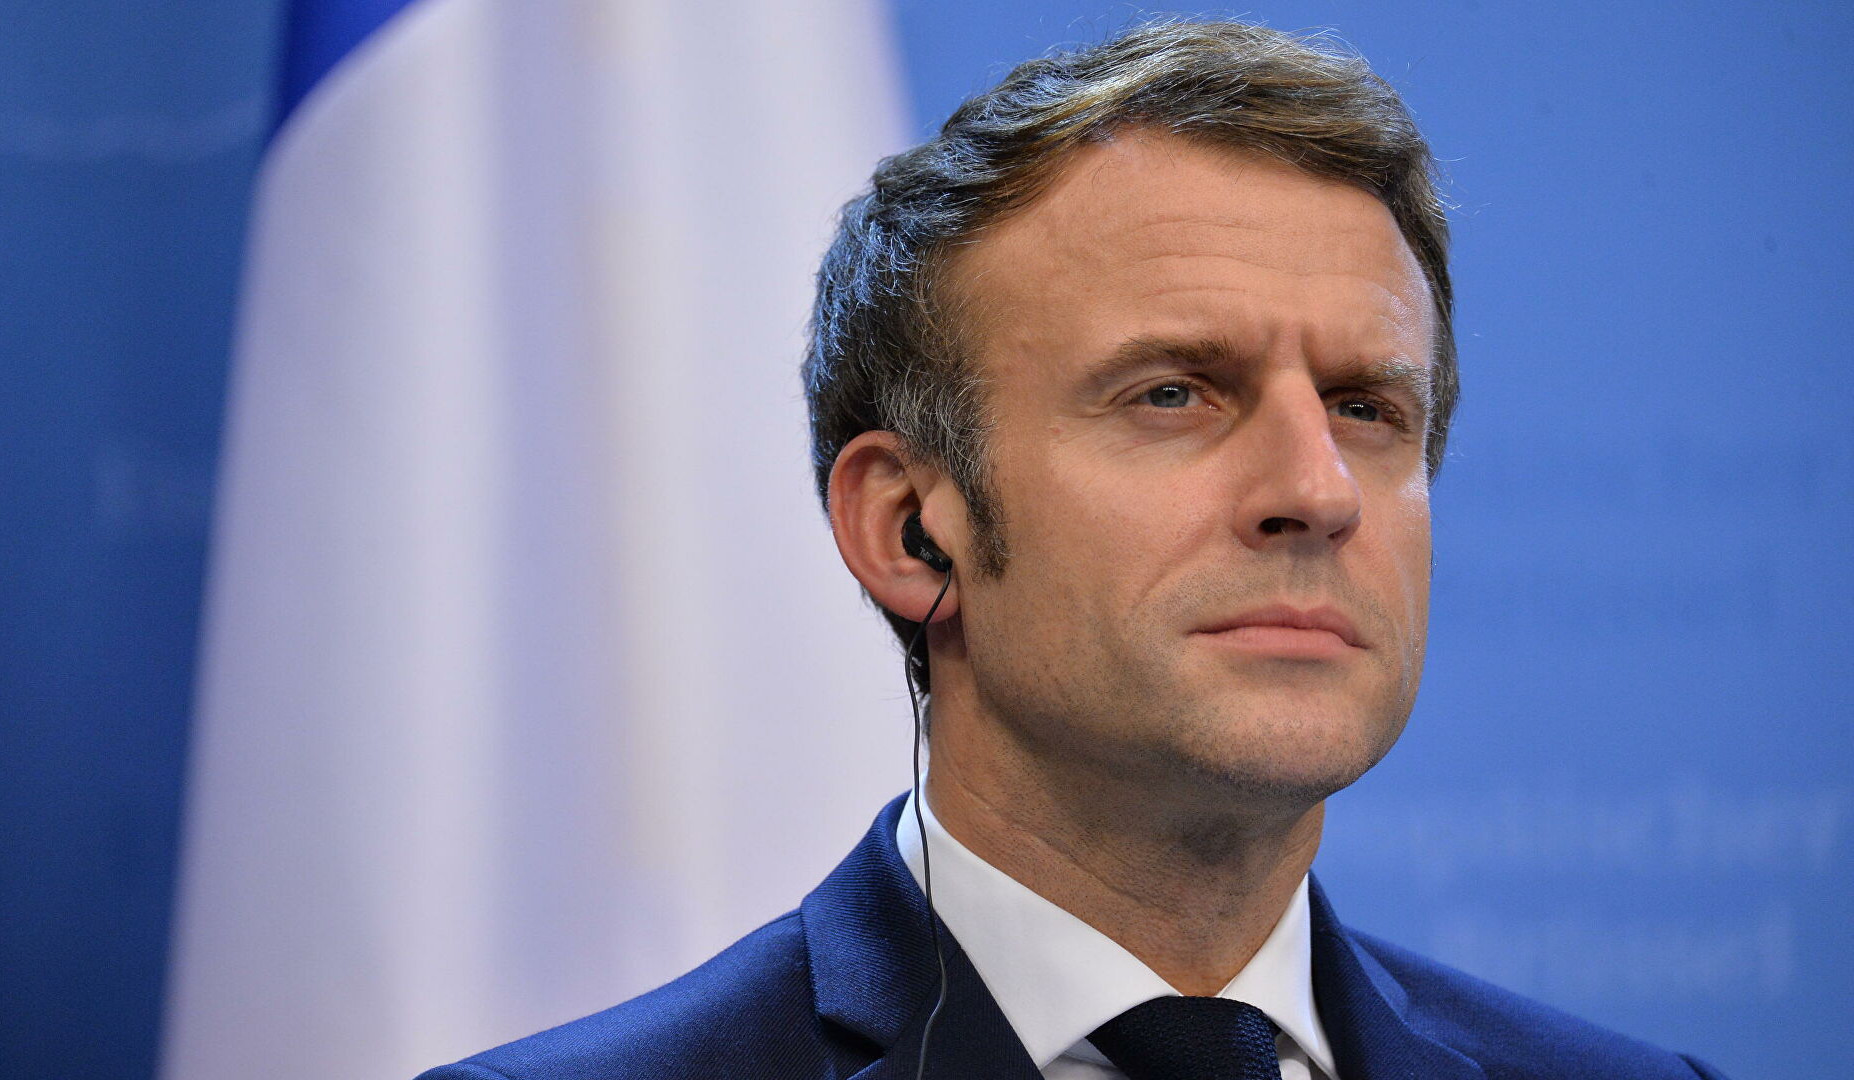 Macron cautions against shaping red lines on Ukraine for Russia